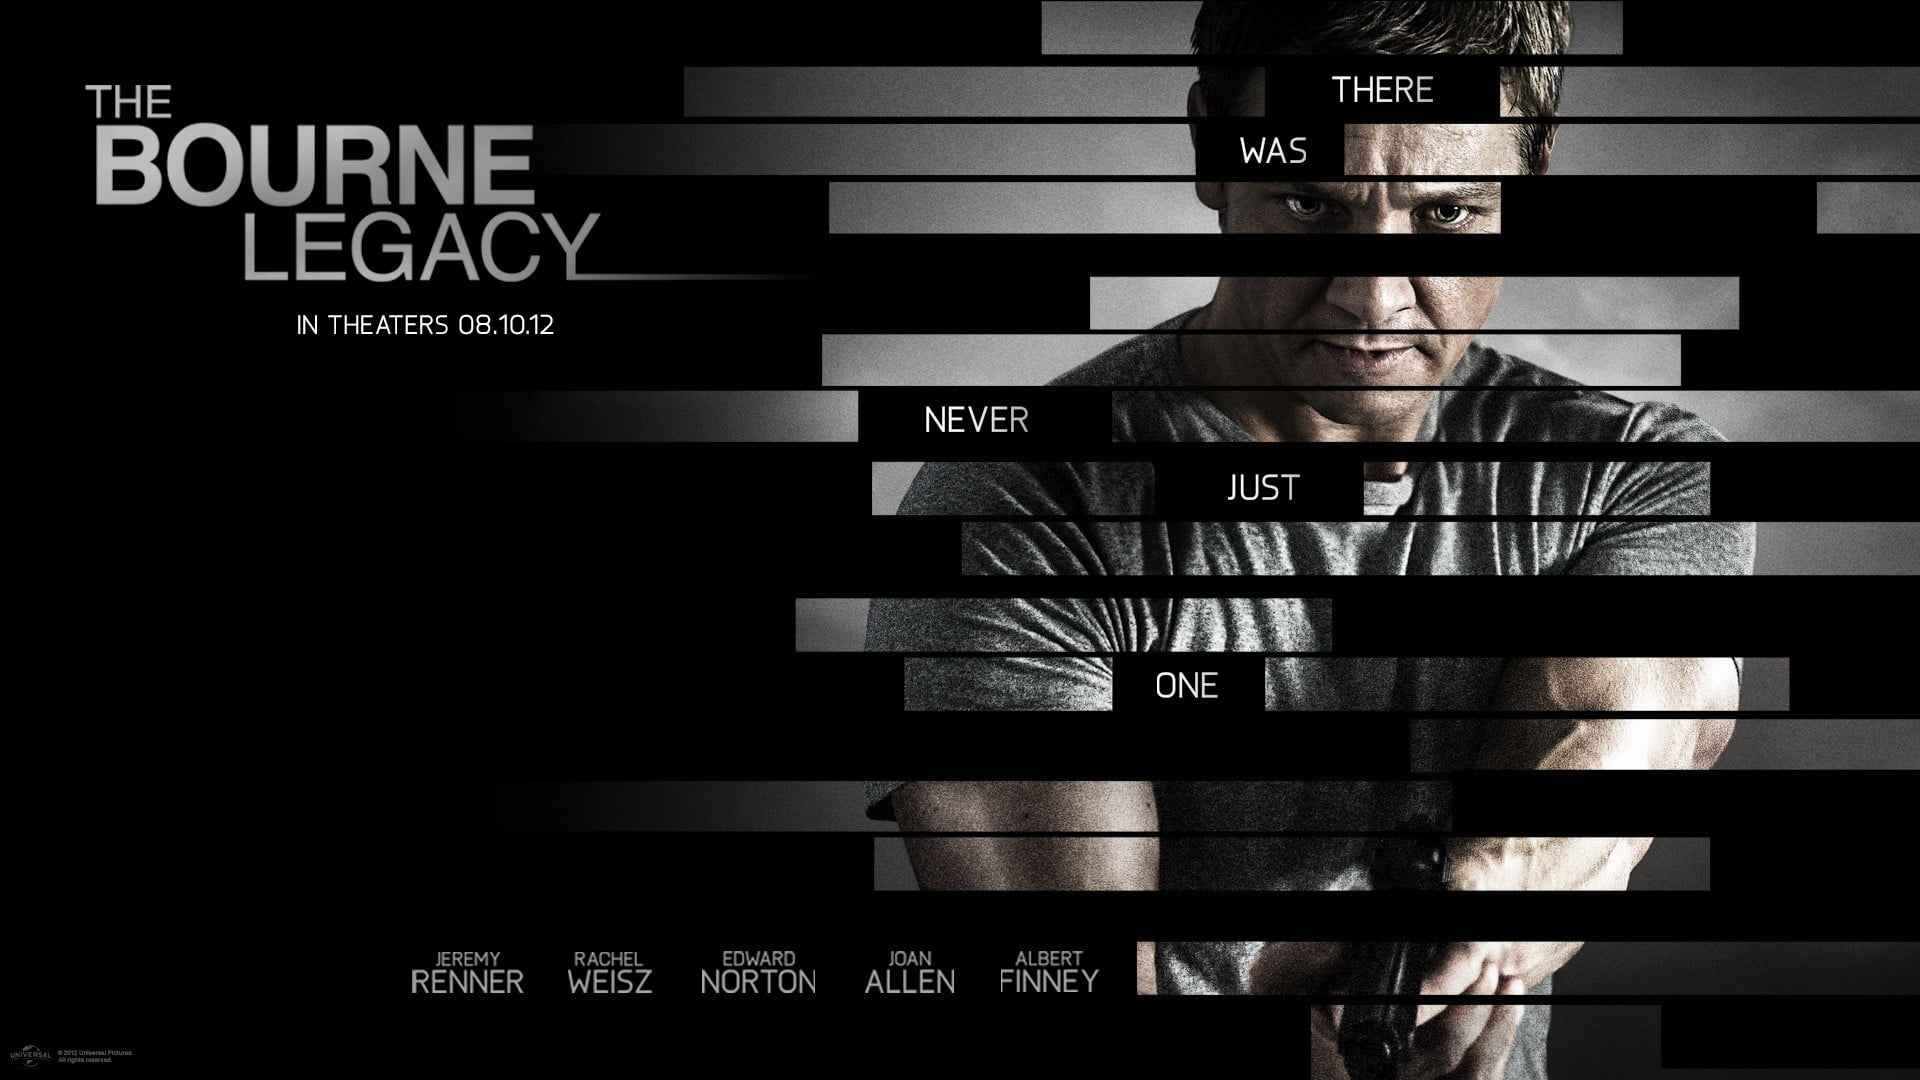 The Bourne Legacy wallpaper, The Bourne Legacy, movies, Jeremy Renner, Jason Bourne